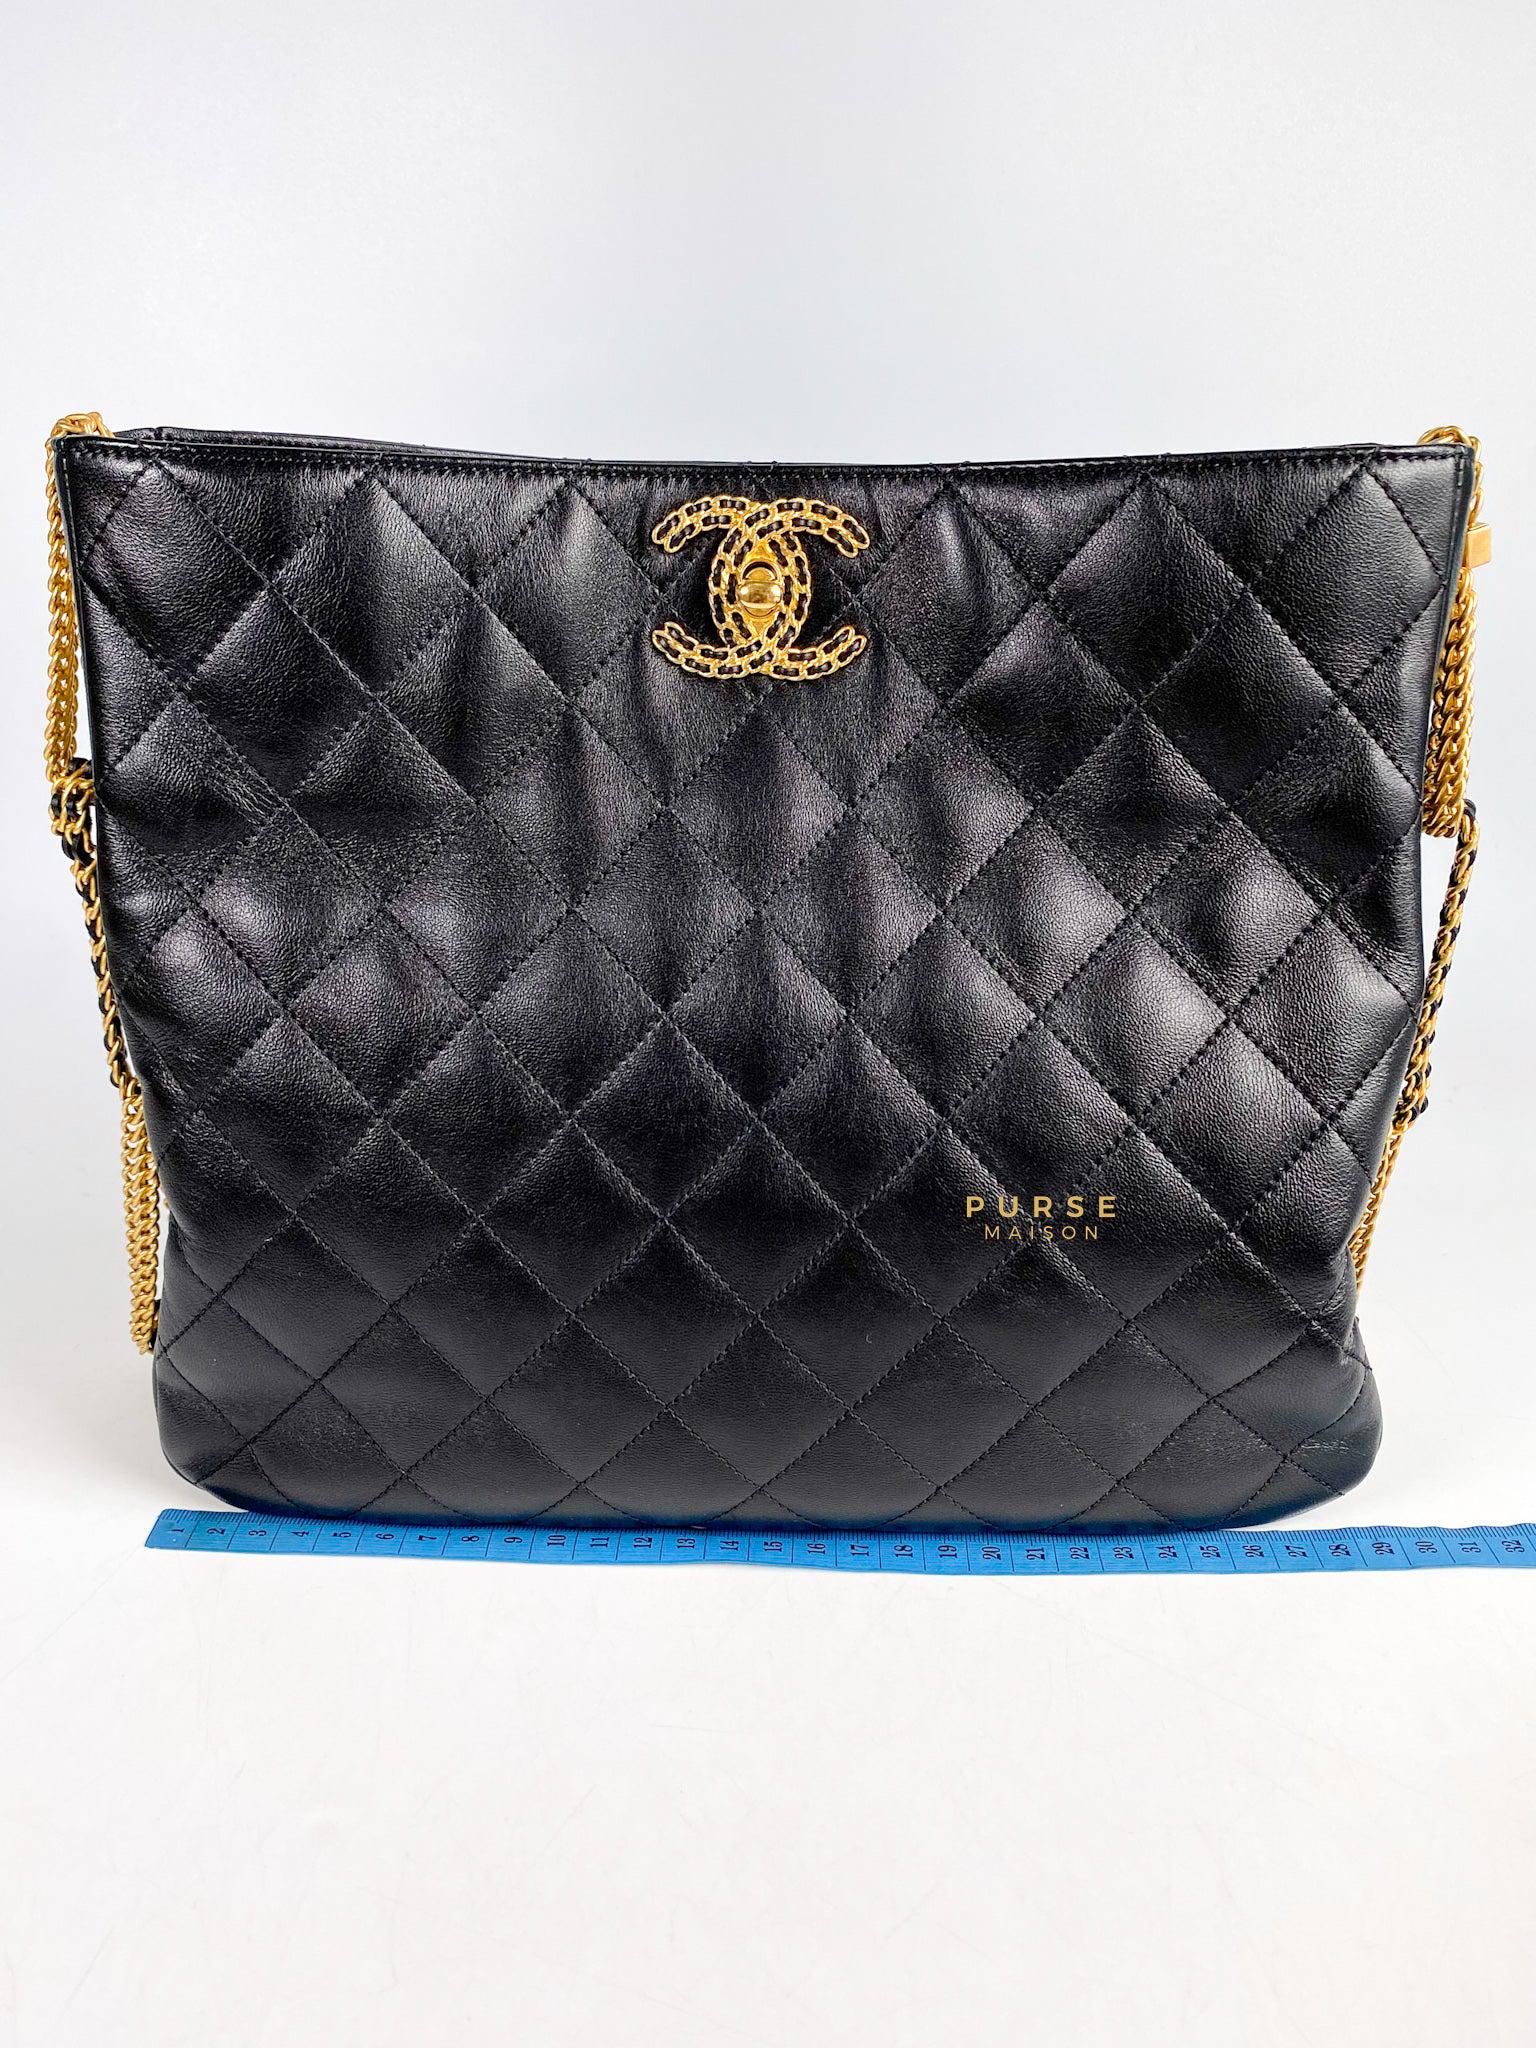 Chanel CC Black Lambskin Leather and Gold Hardware Hobo Tote Bag (Microchip)